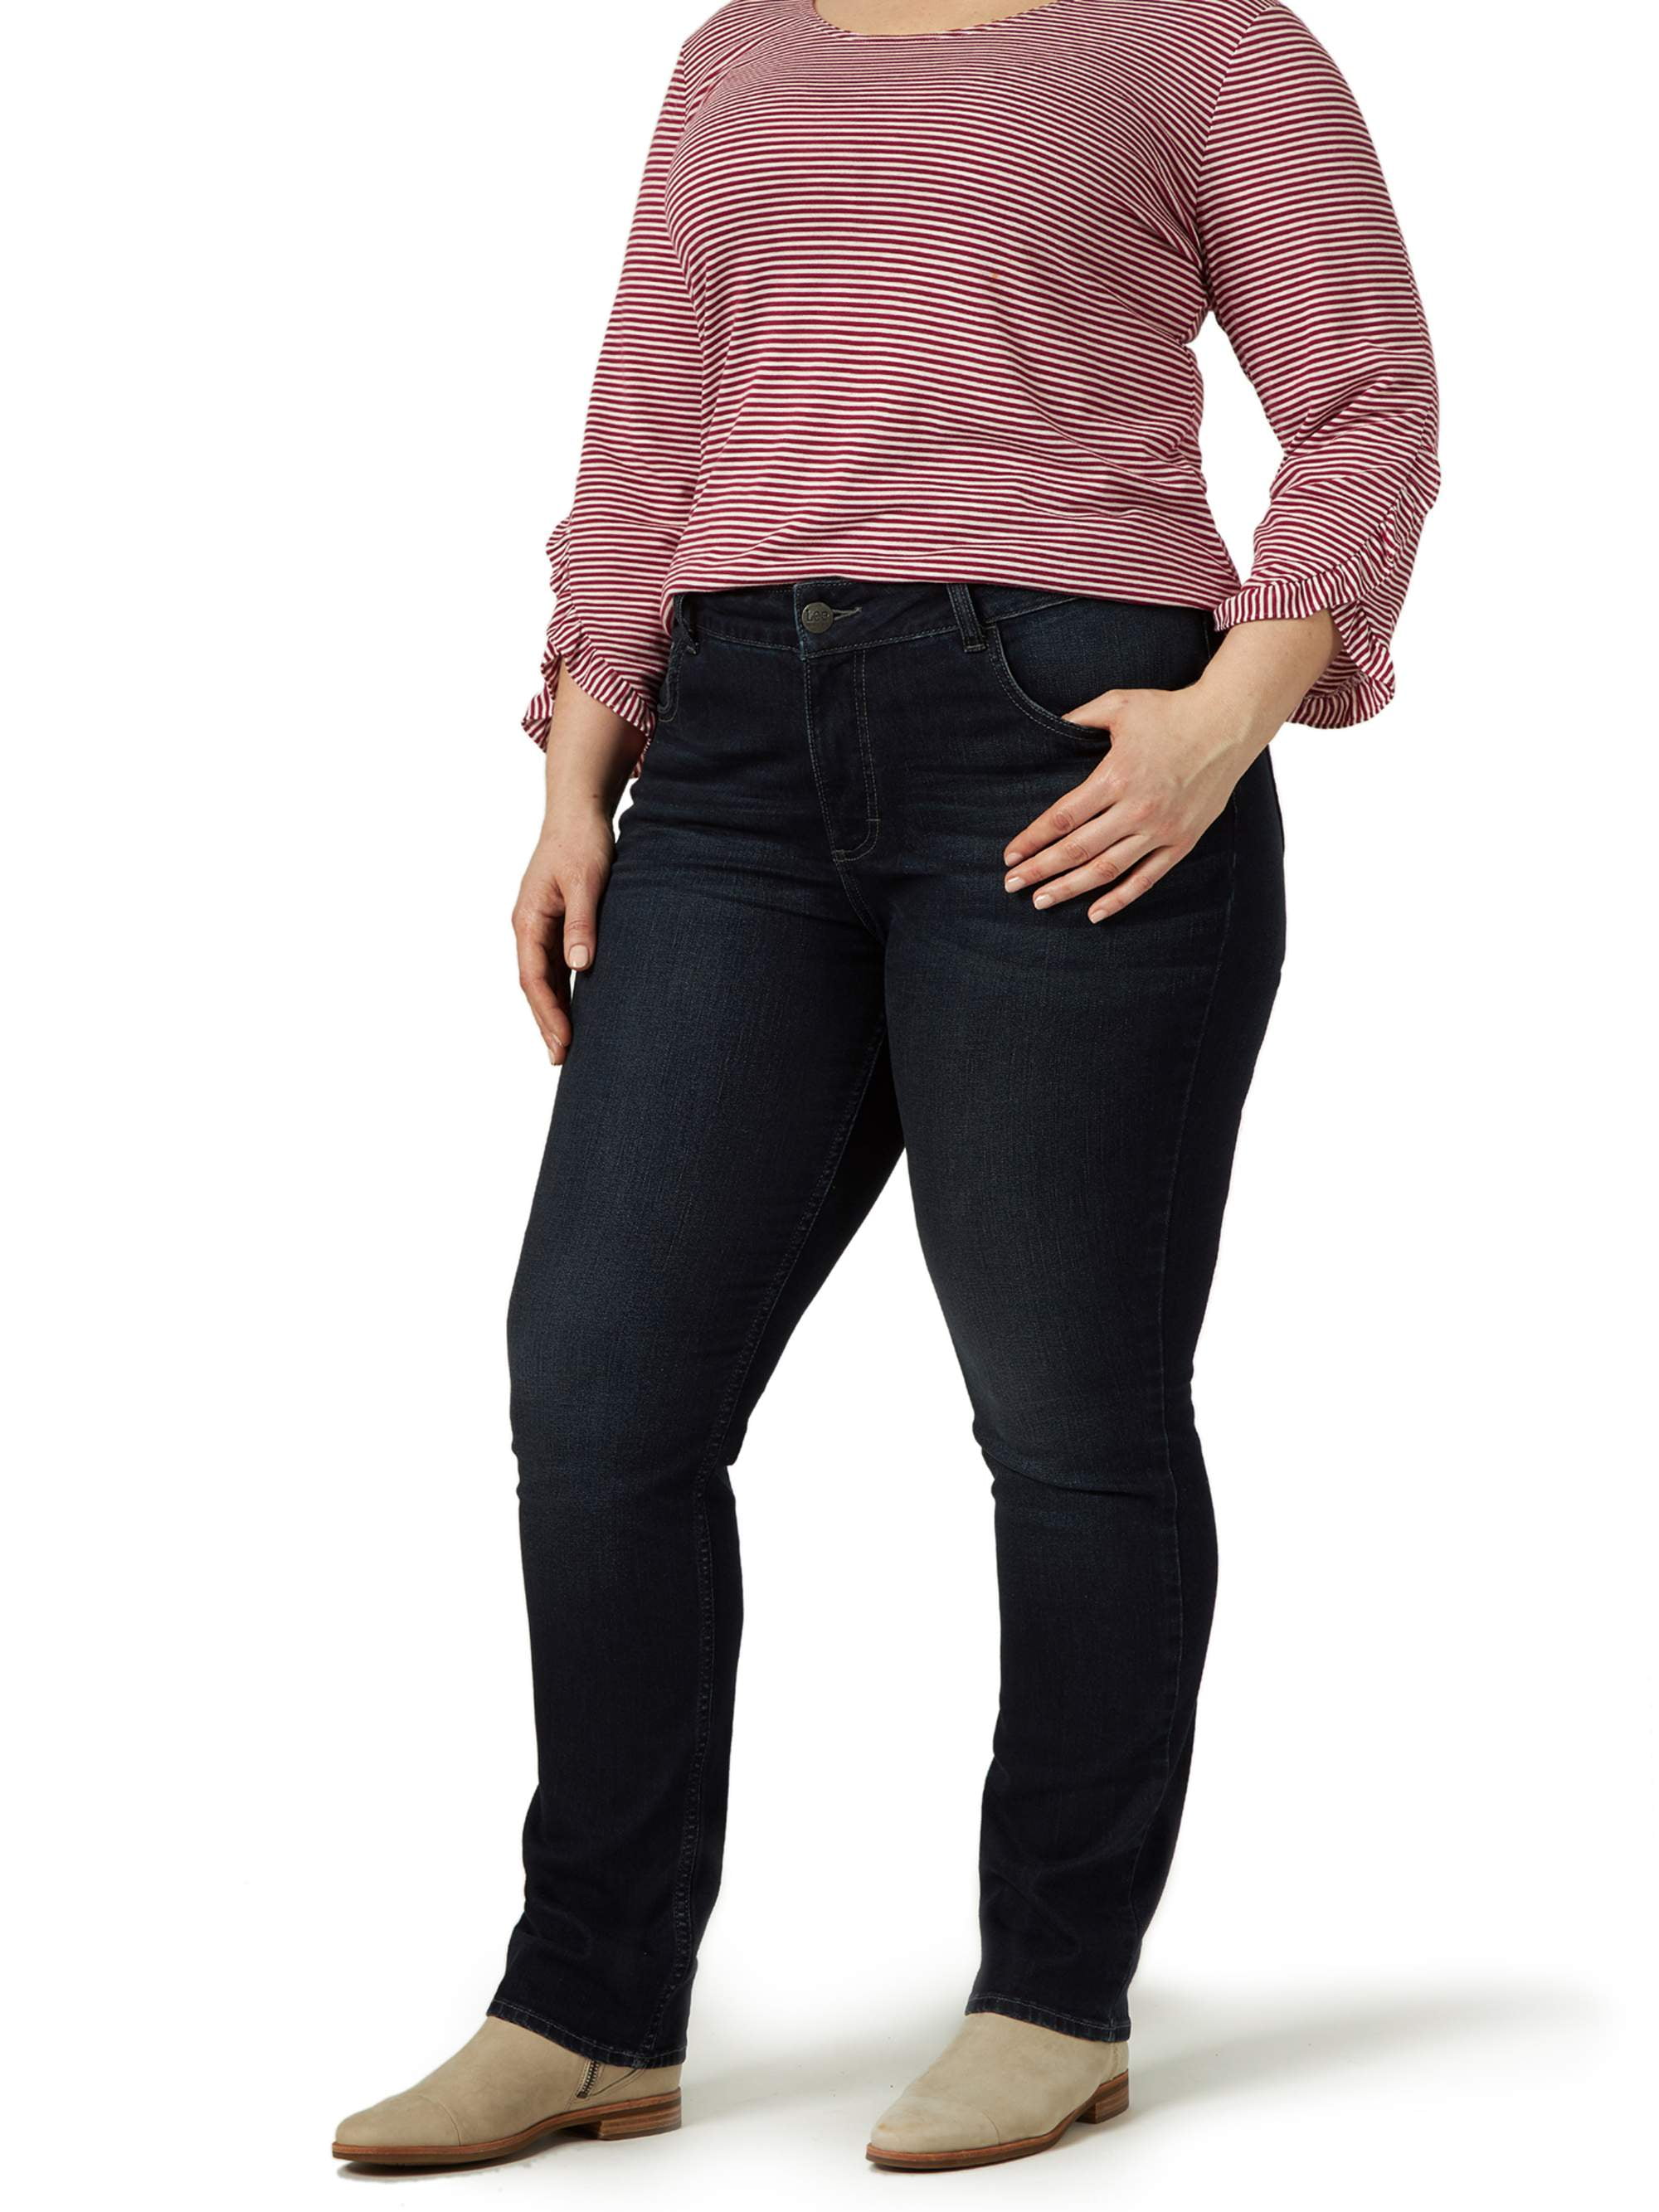 lee riders plus size jeans